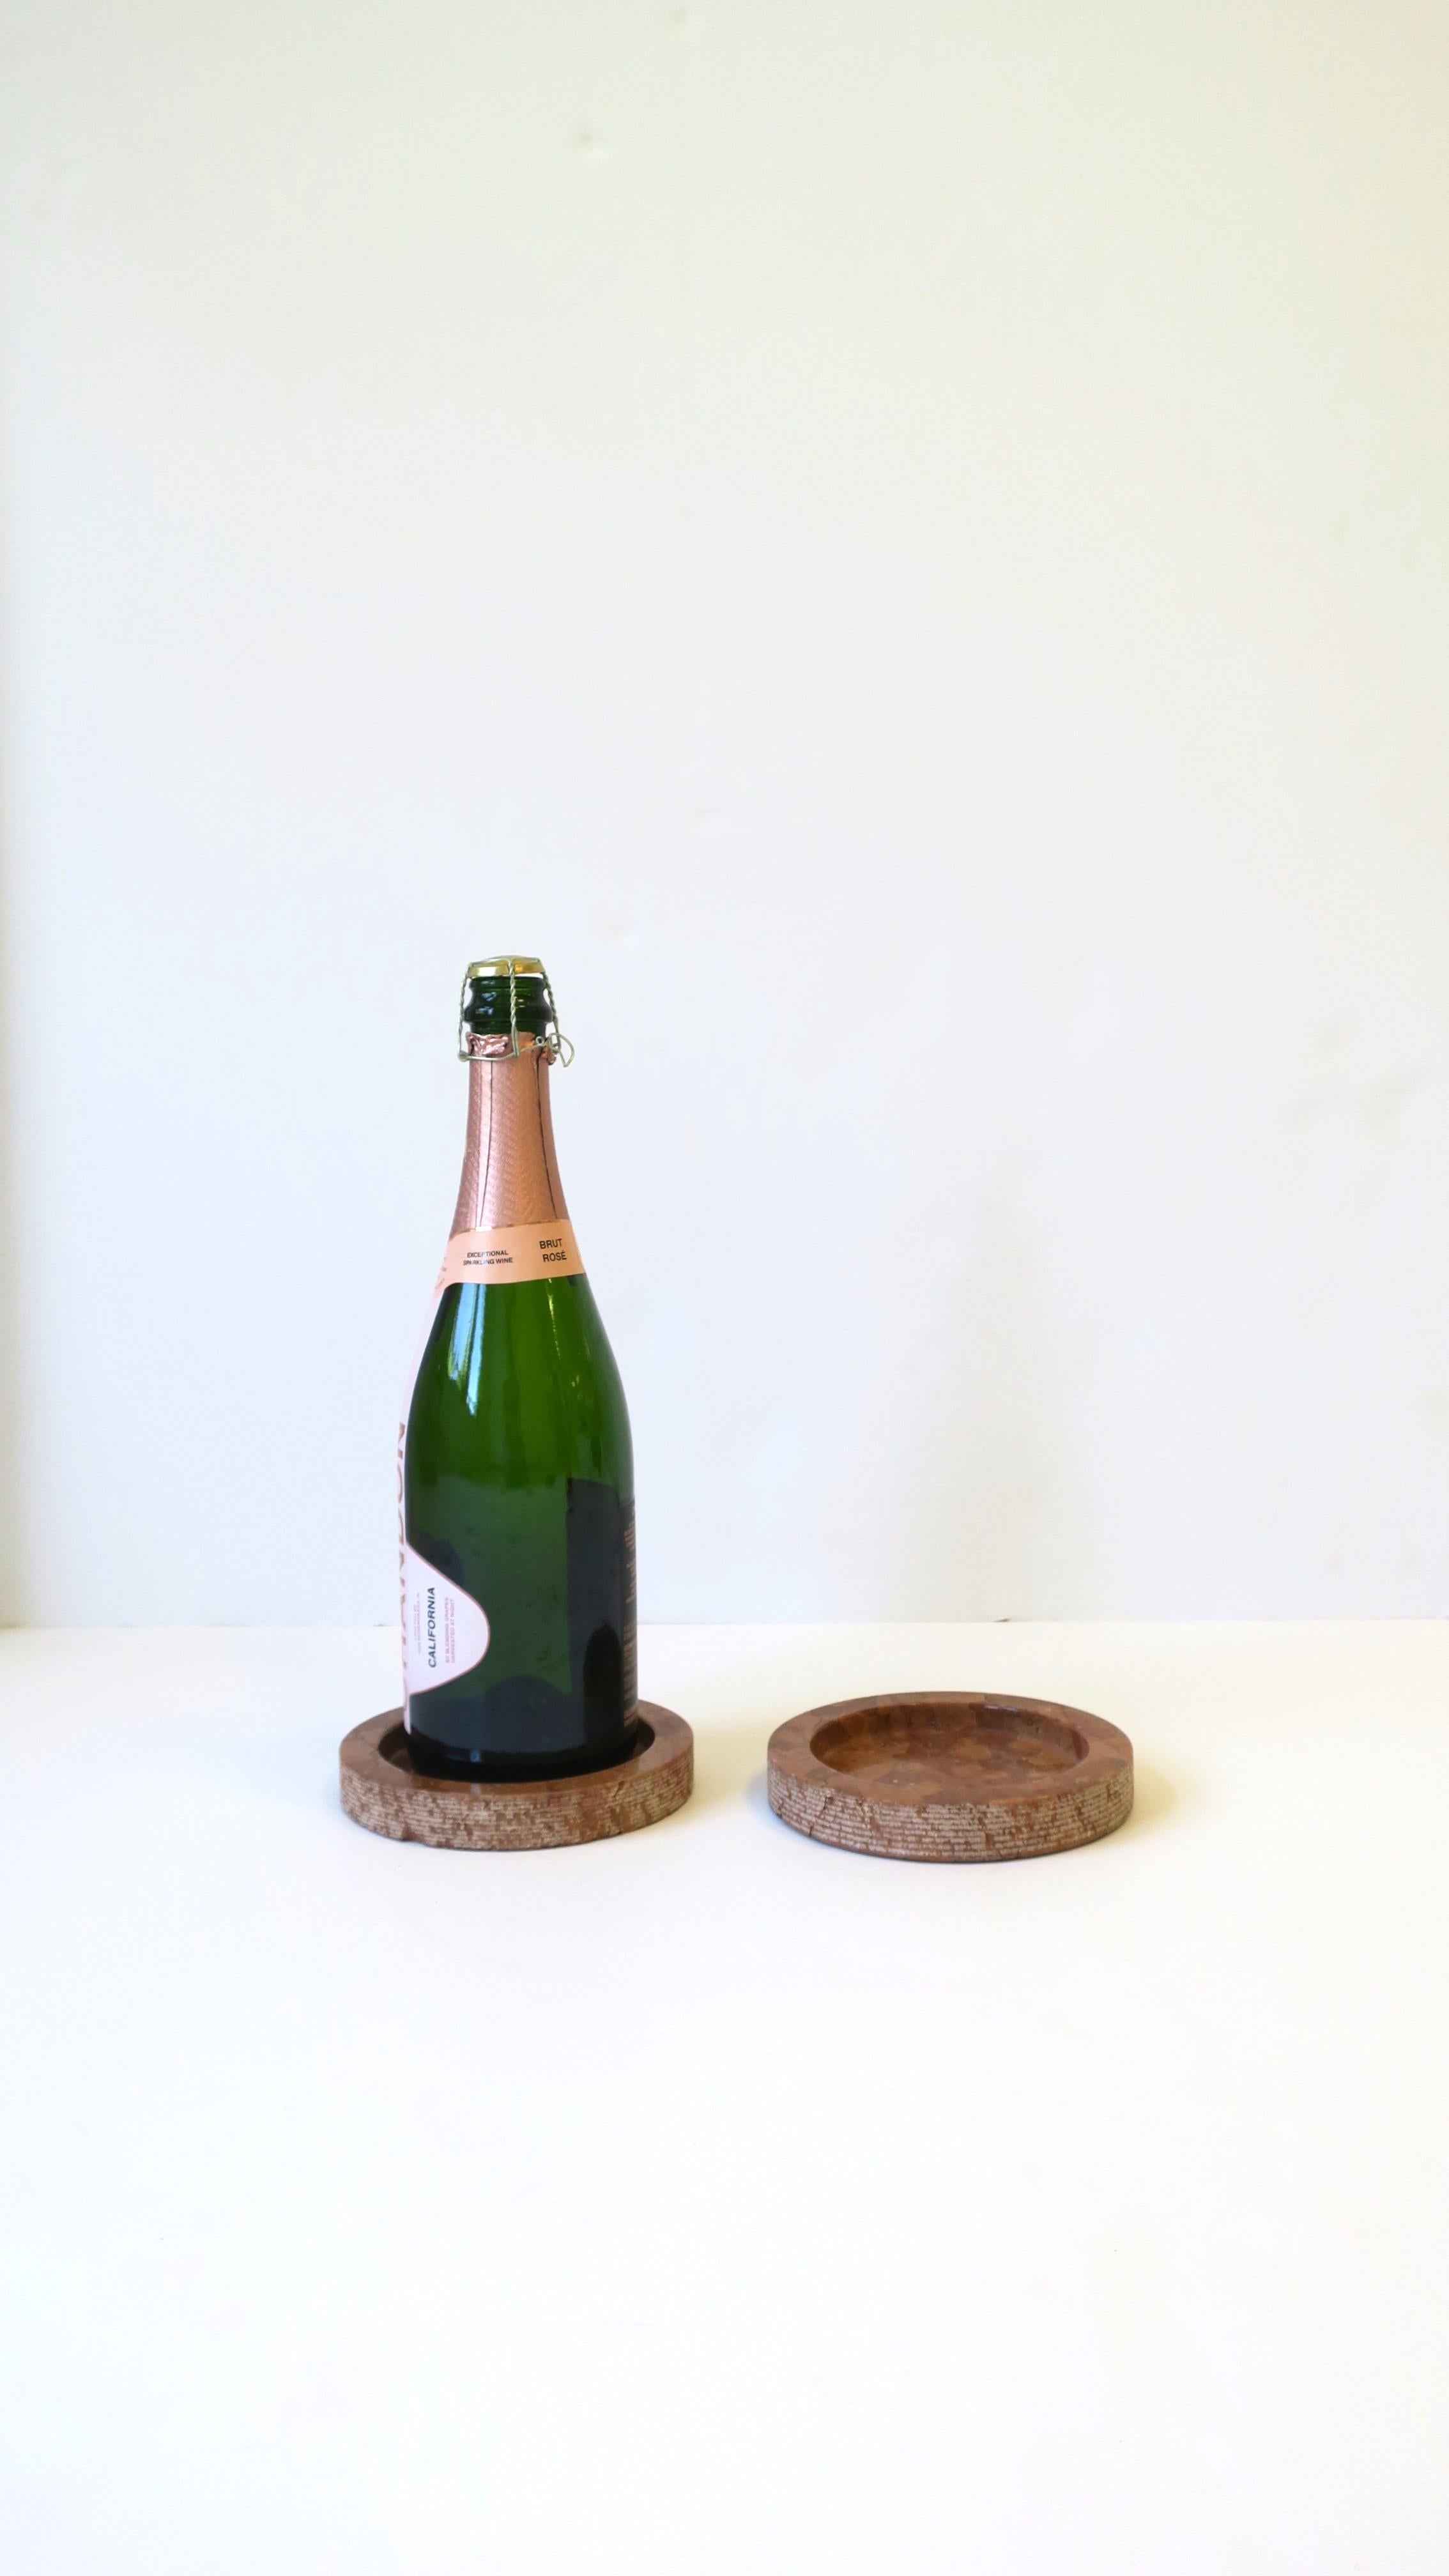 20th Century Italian Postmodern Marble Terracotta Wine Bottle Coaster or Catchall, Set of 2 For Sale